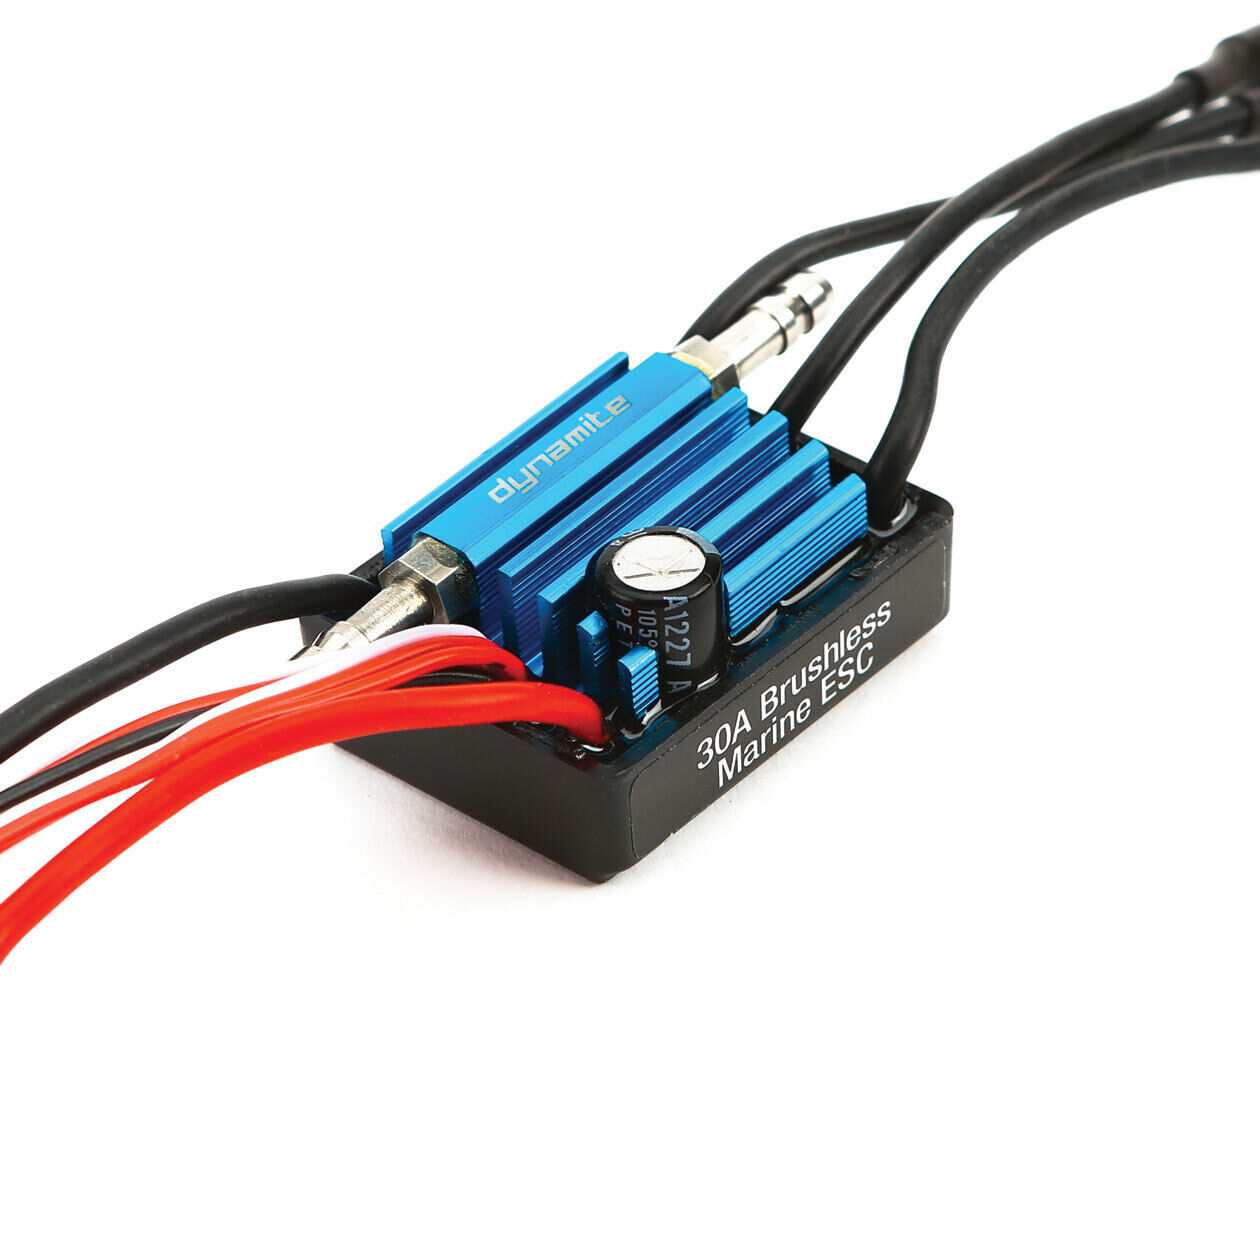 Dynamite 30A Brushless Marine ESC 2-3S DYNM3860 Replacement Boat Parts